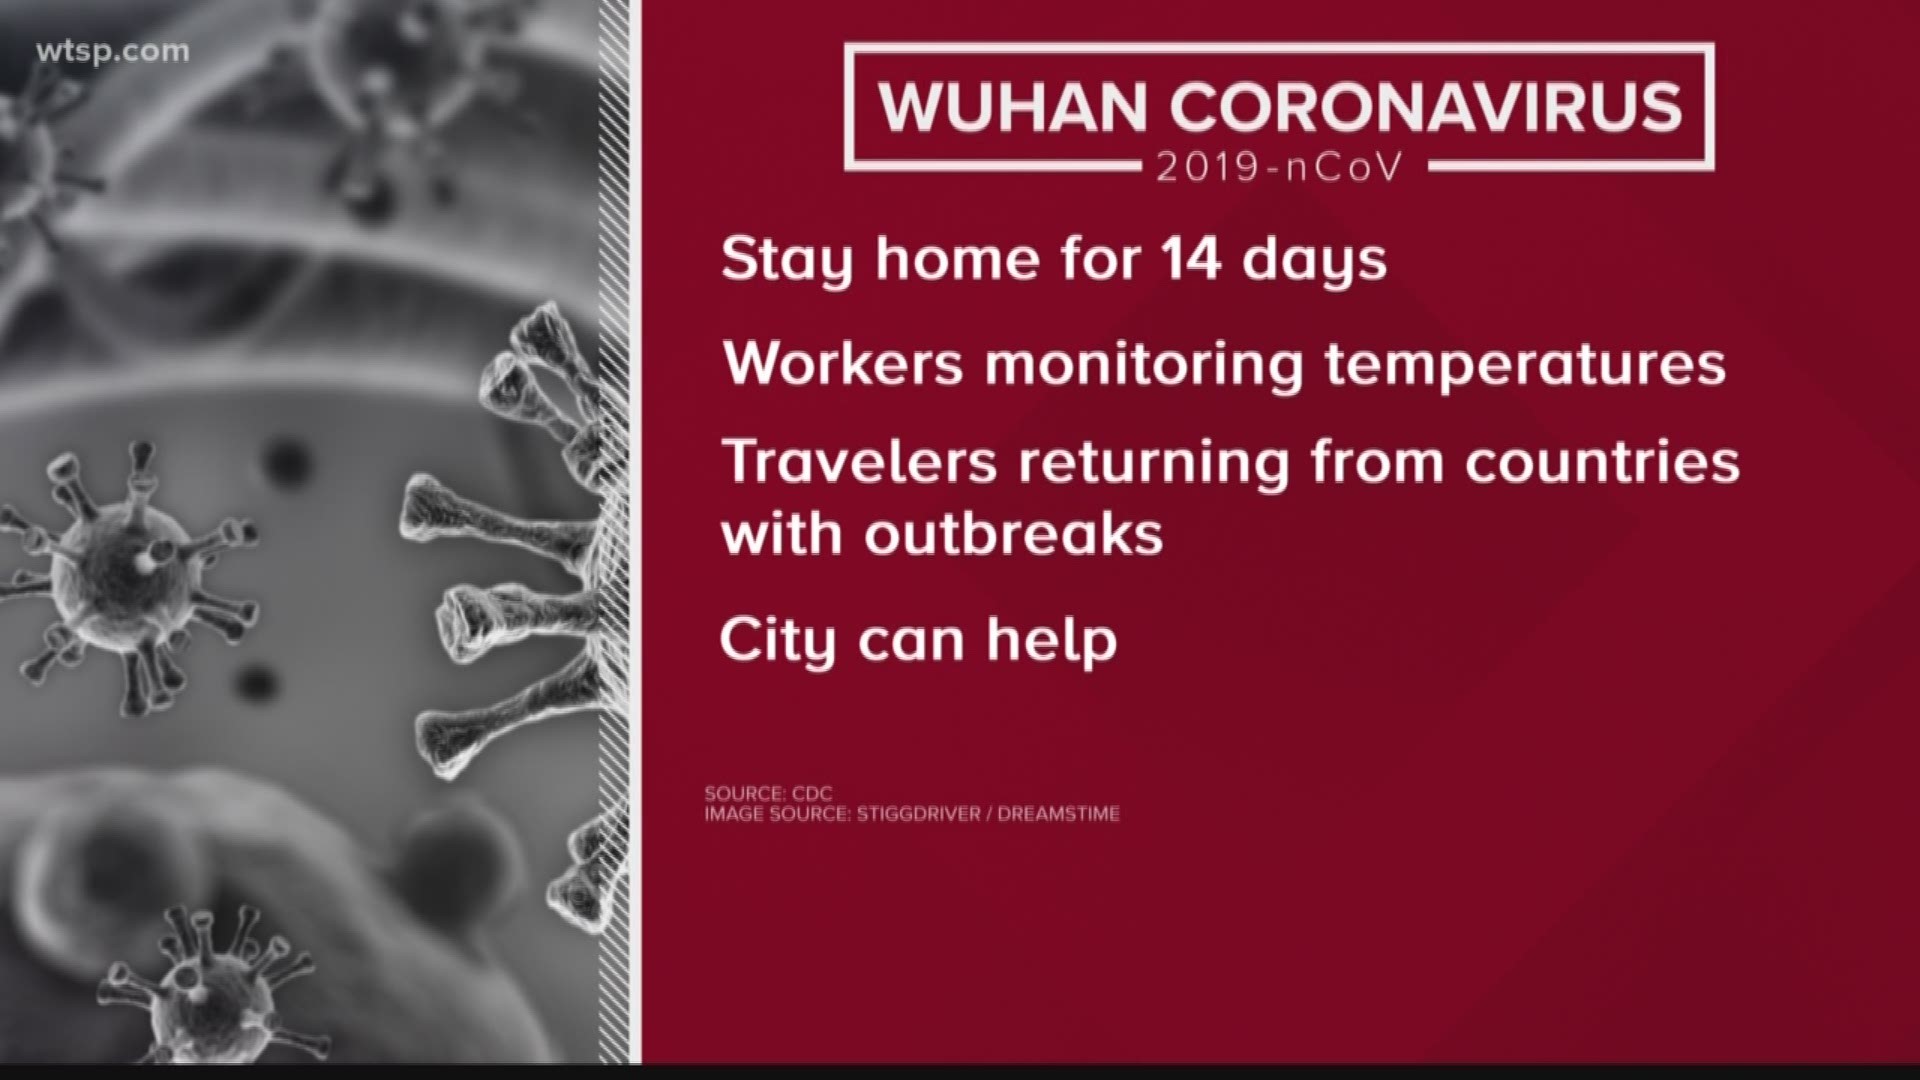 The new coronavirus, which was first detected in China, has reached Florida.